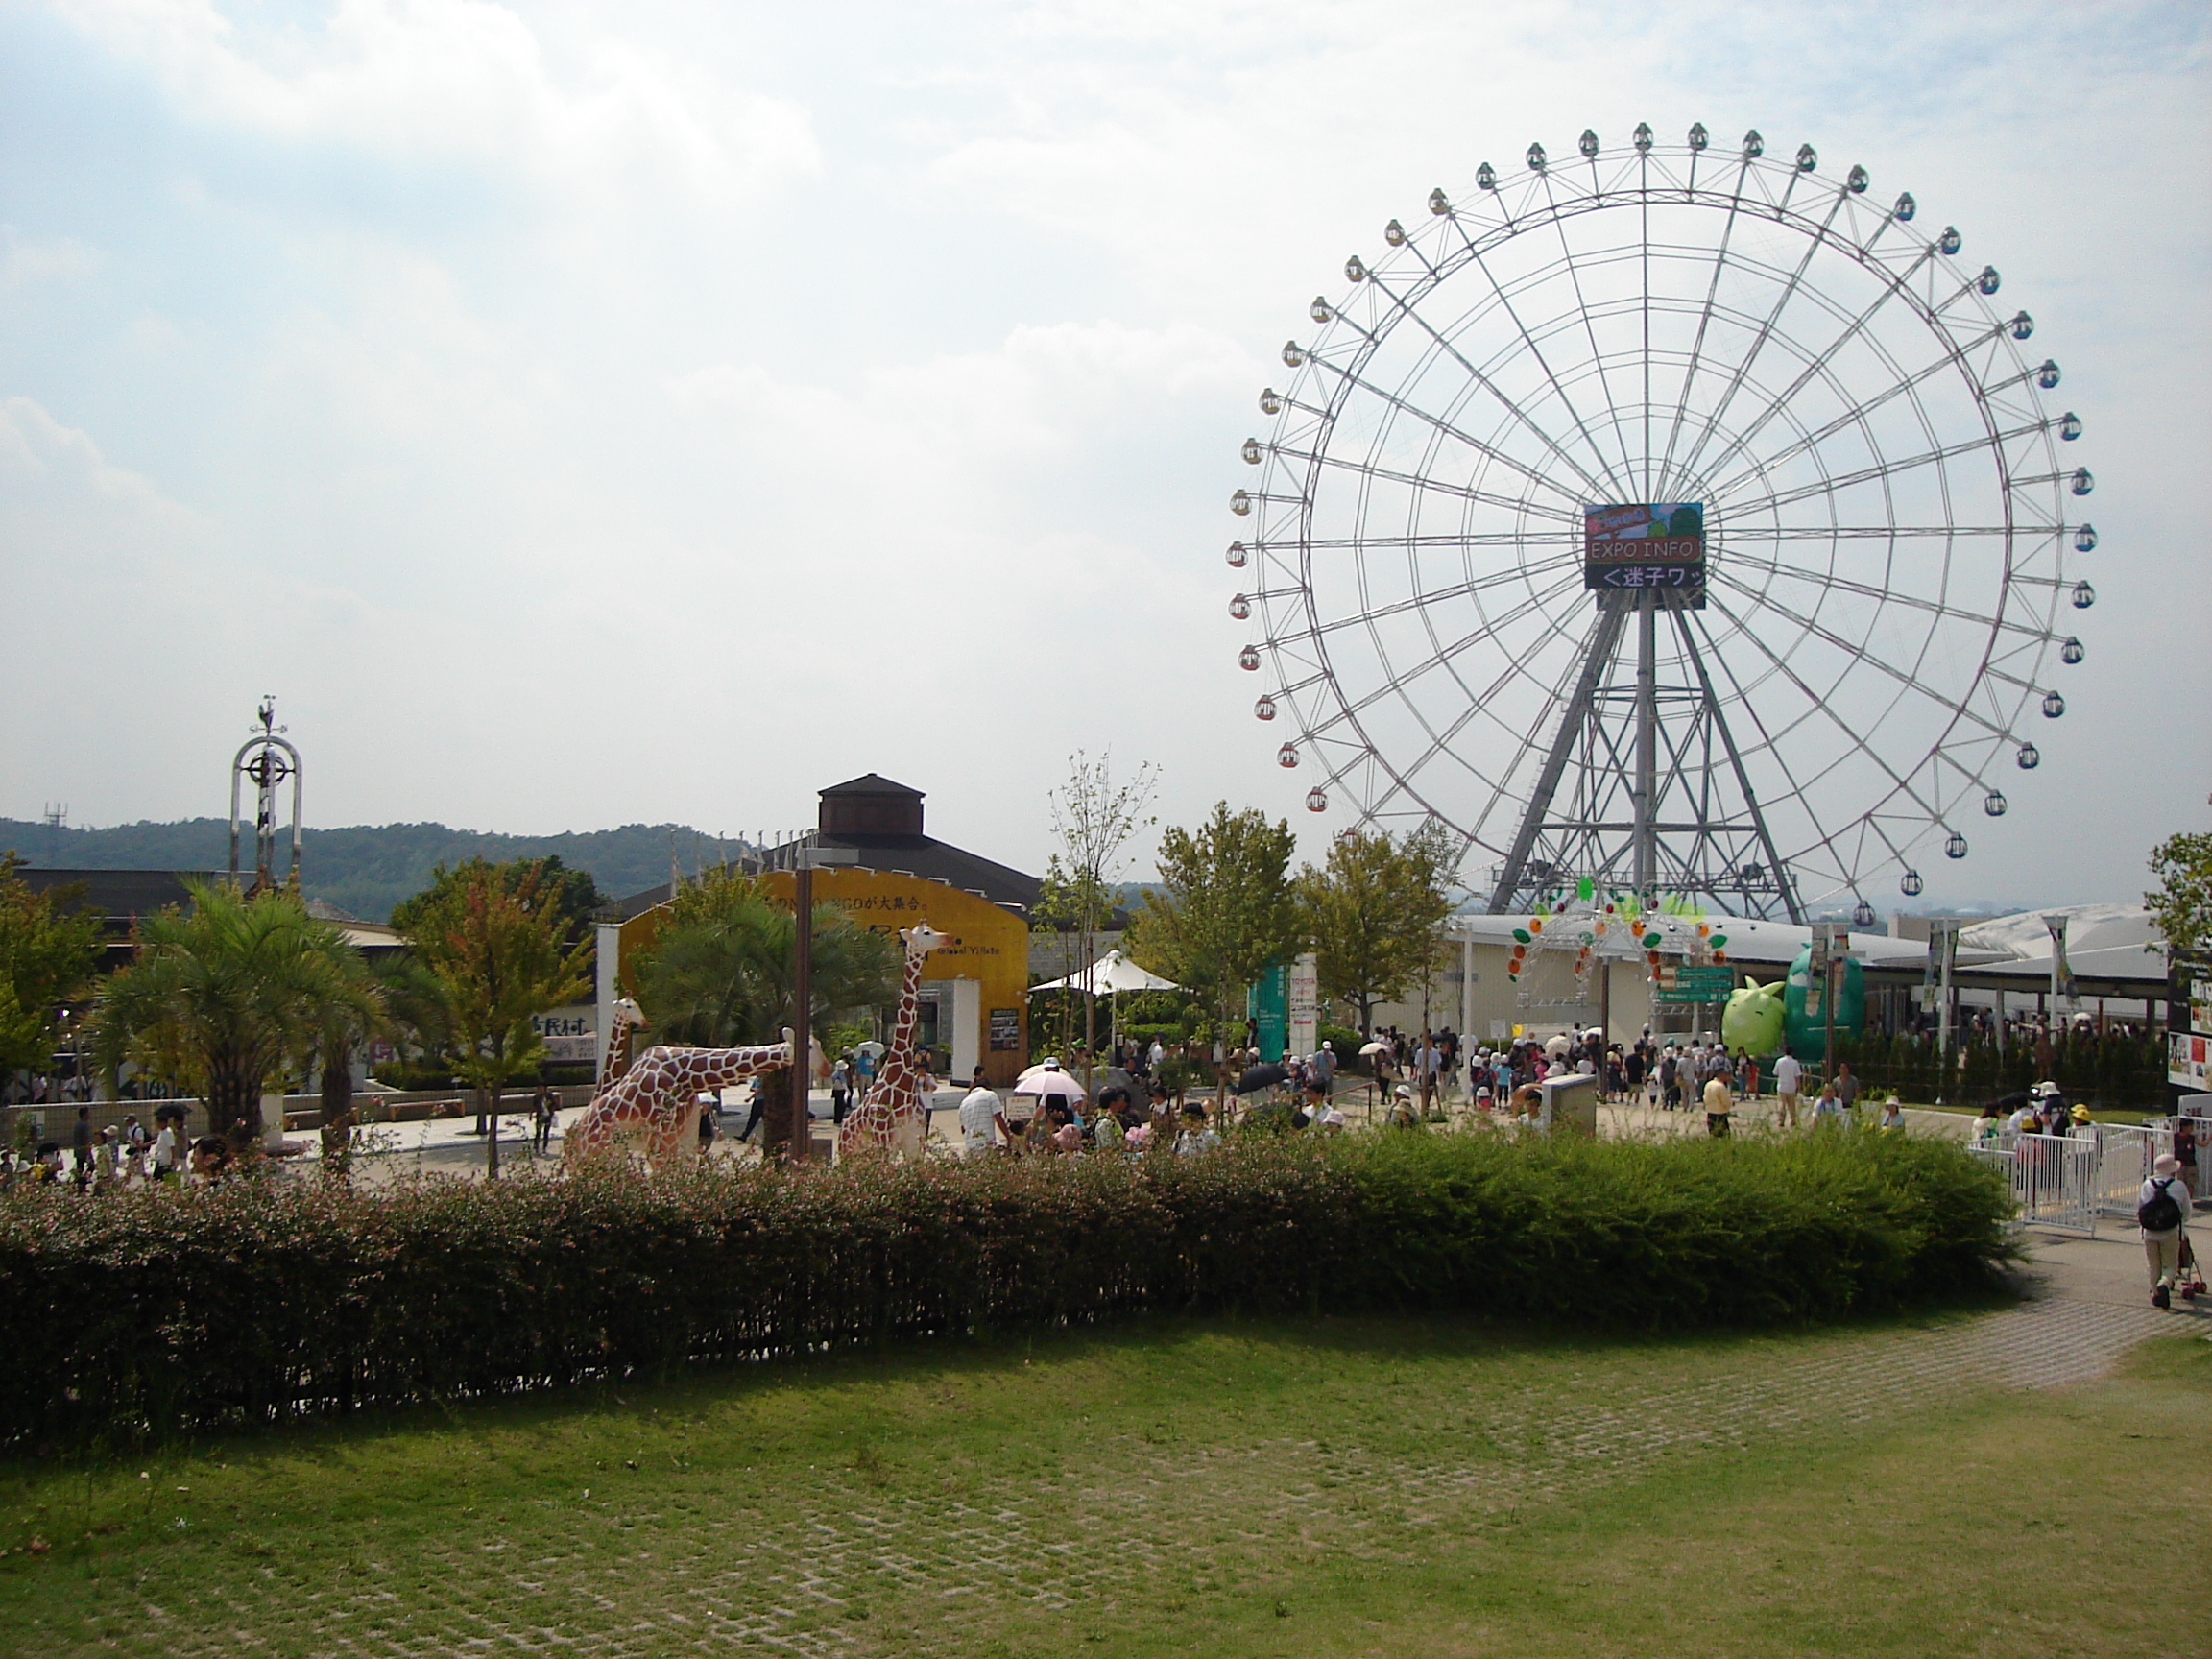 the expo site is dominated by a ferris wheel